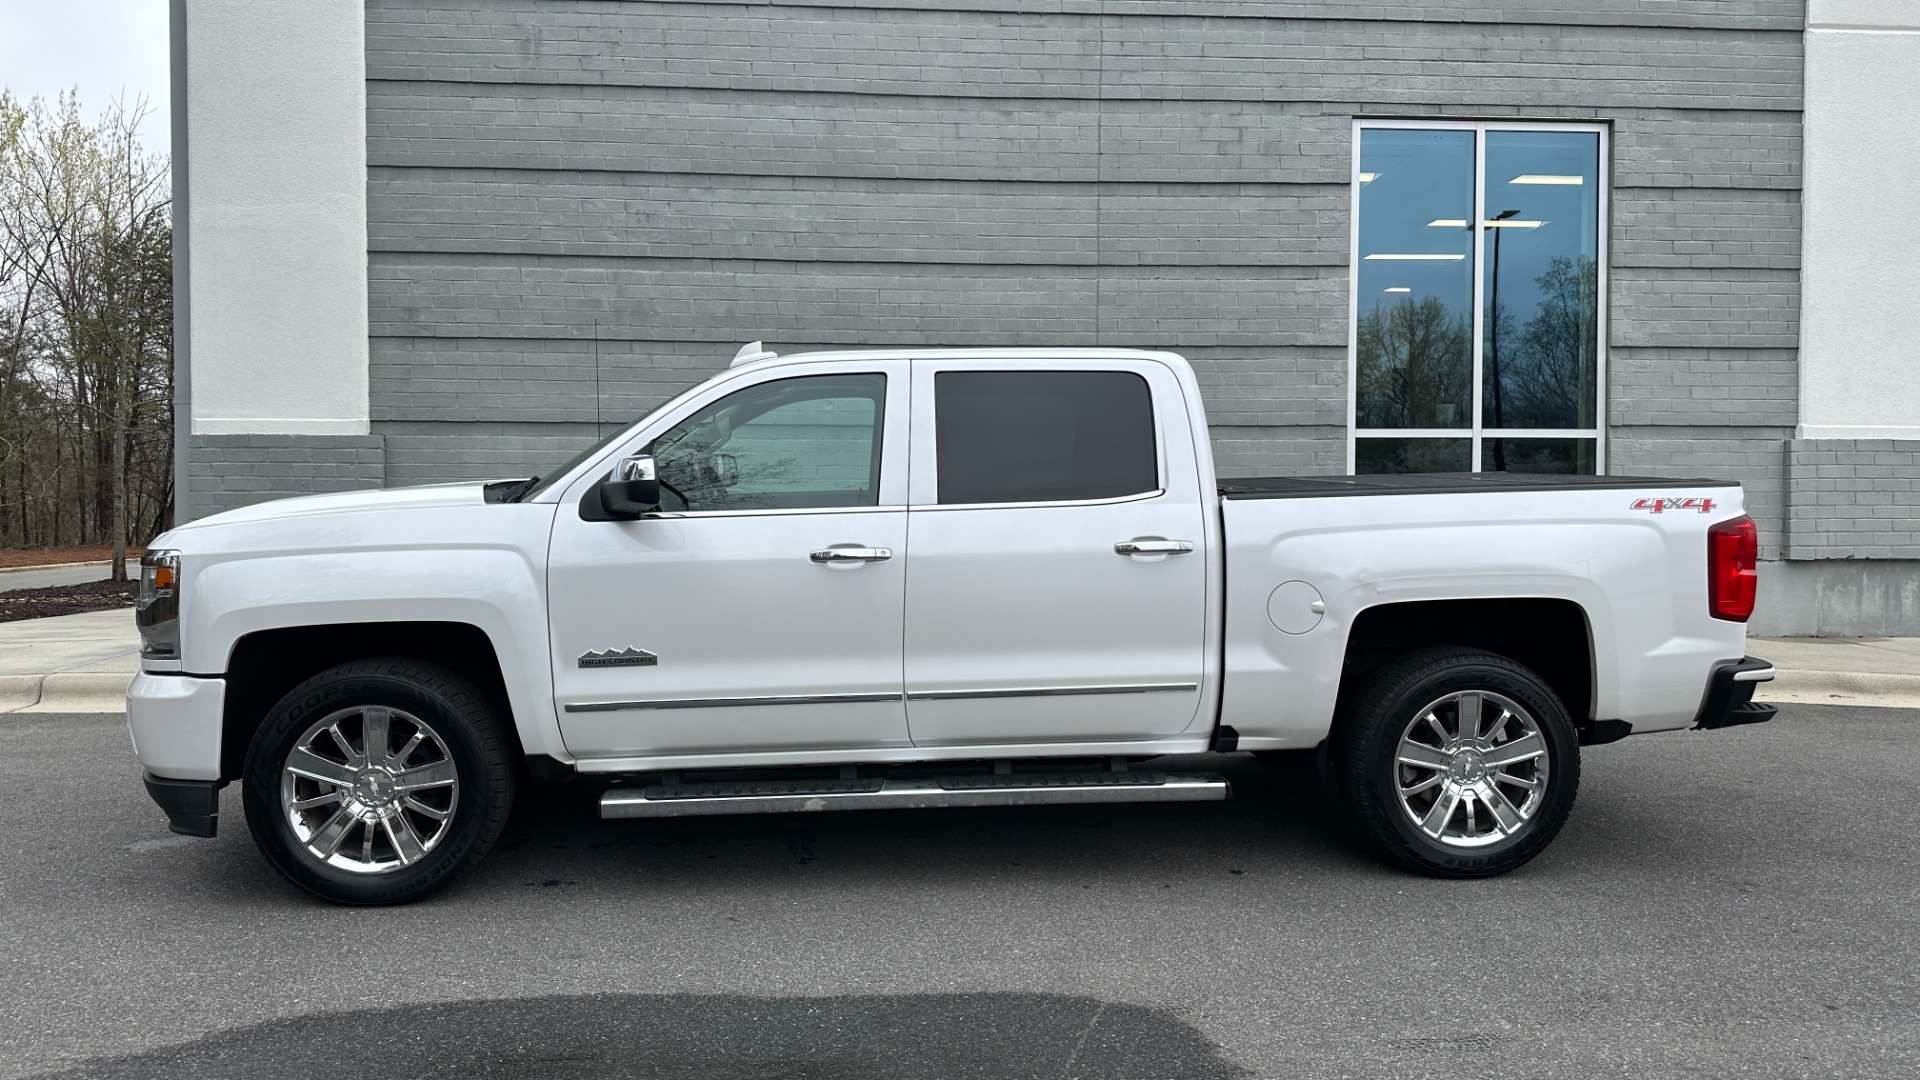 Used 2016 Chevrolet Silverado 1500 HIGH COUNTRY / PREMIUM PACKAGE / PEARL PAINT / SUNROOF / 4X4 for sale Sold at Formula Imports in Charlotte NC 28227 3